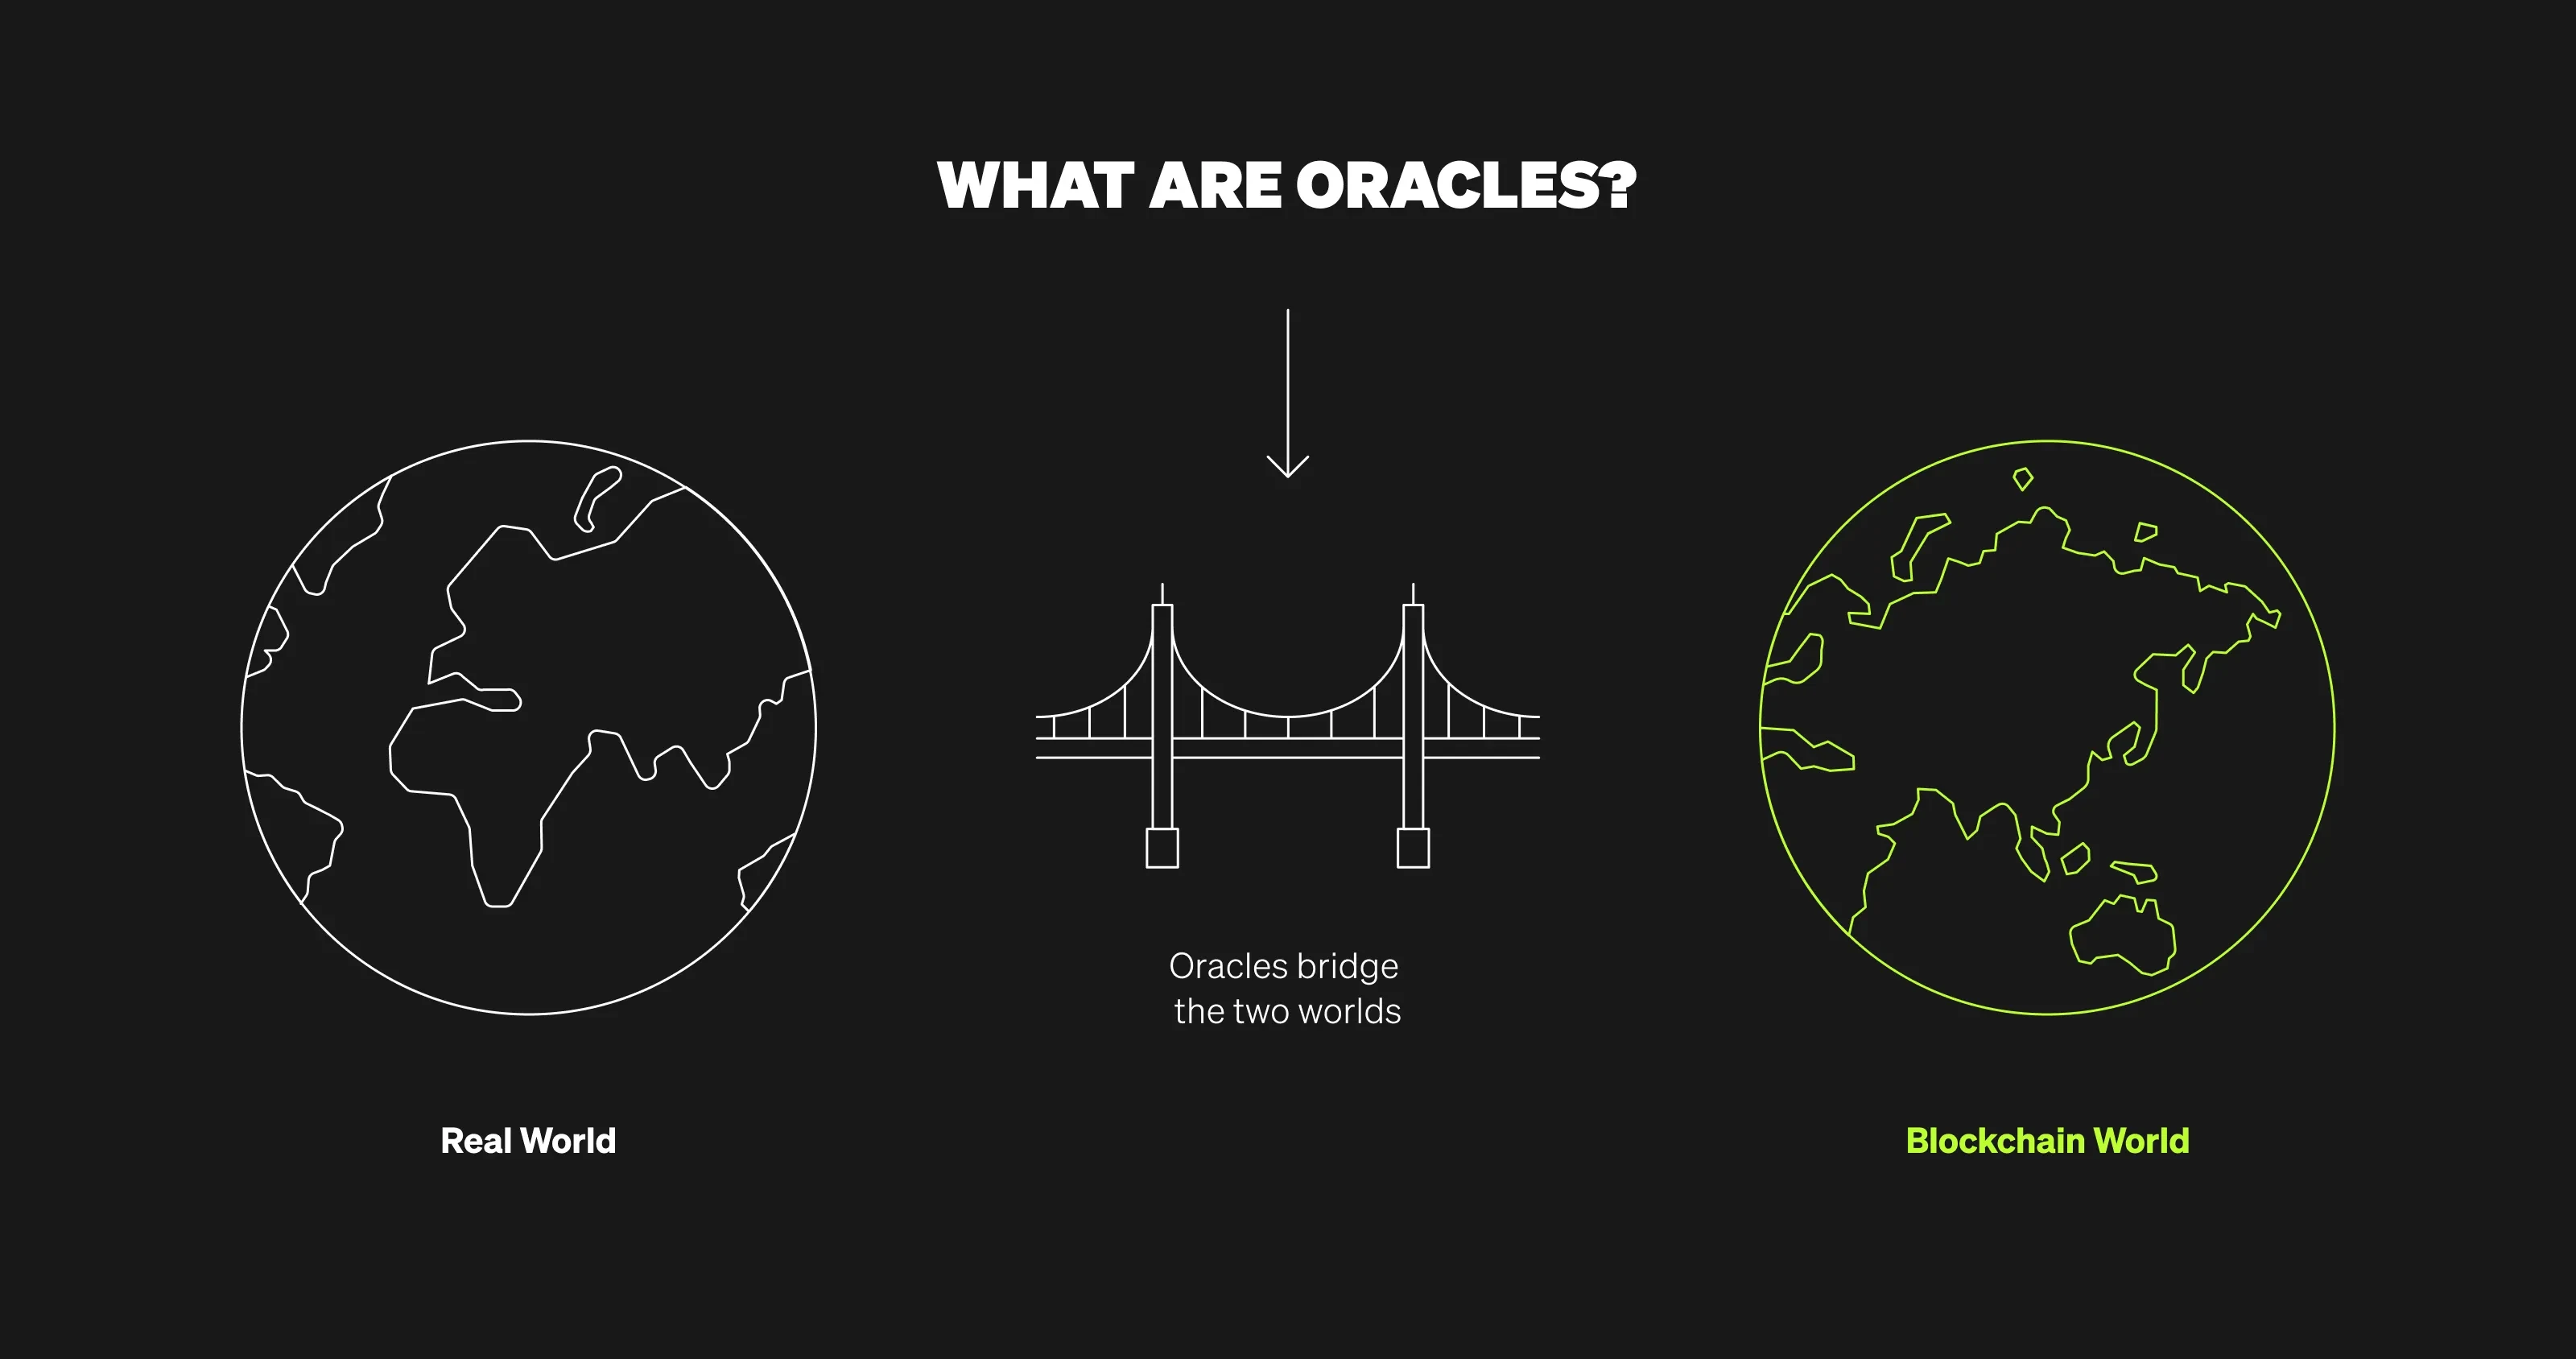 What are oracles?